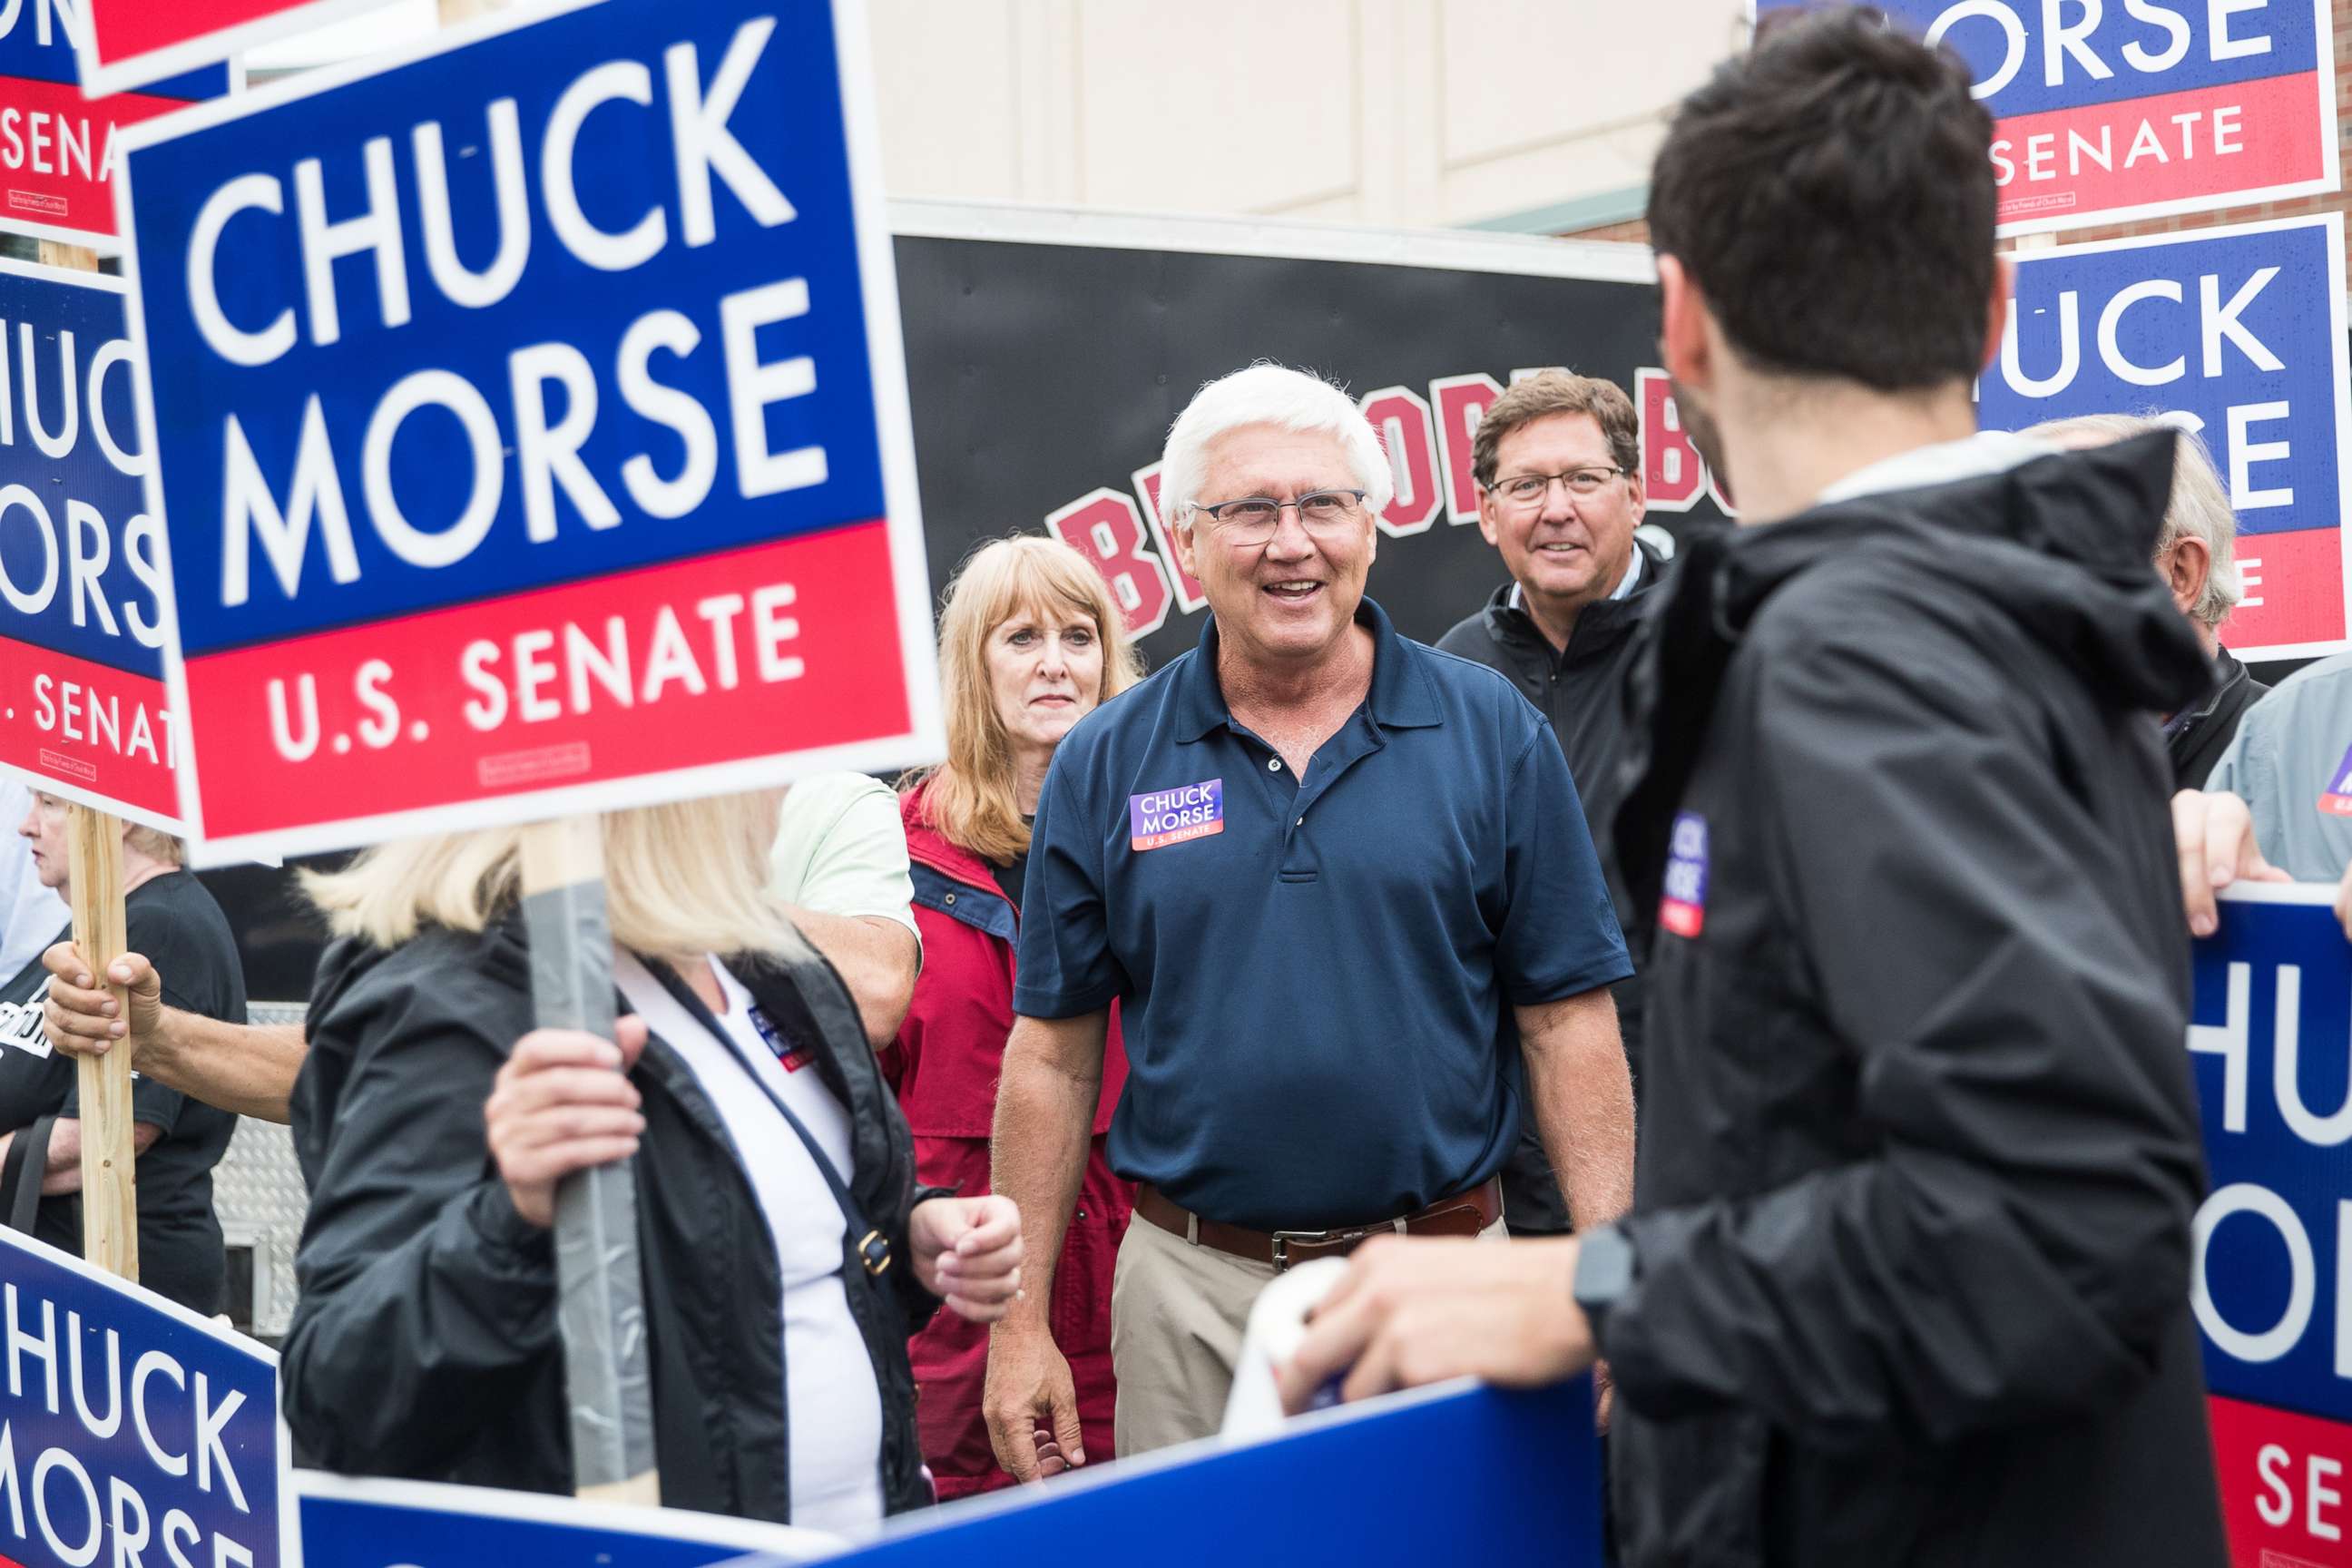 PHOTO: Republican Senate candidate Chuck Morse greets supporters during a campaign stop to the Bedford High School polling location in Bedford, N.H., Sept. 13, 2022.